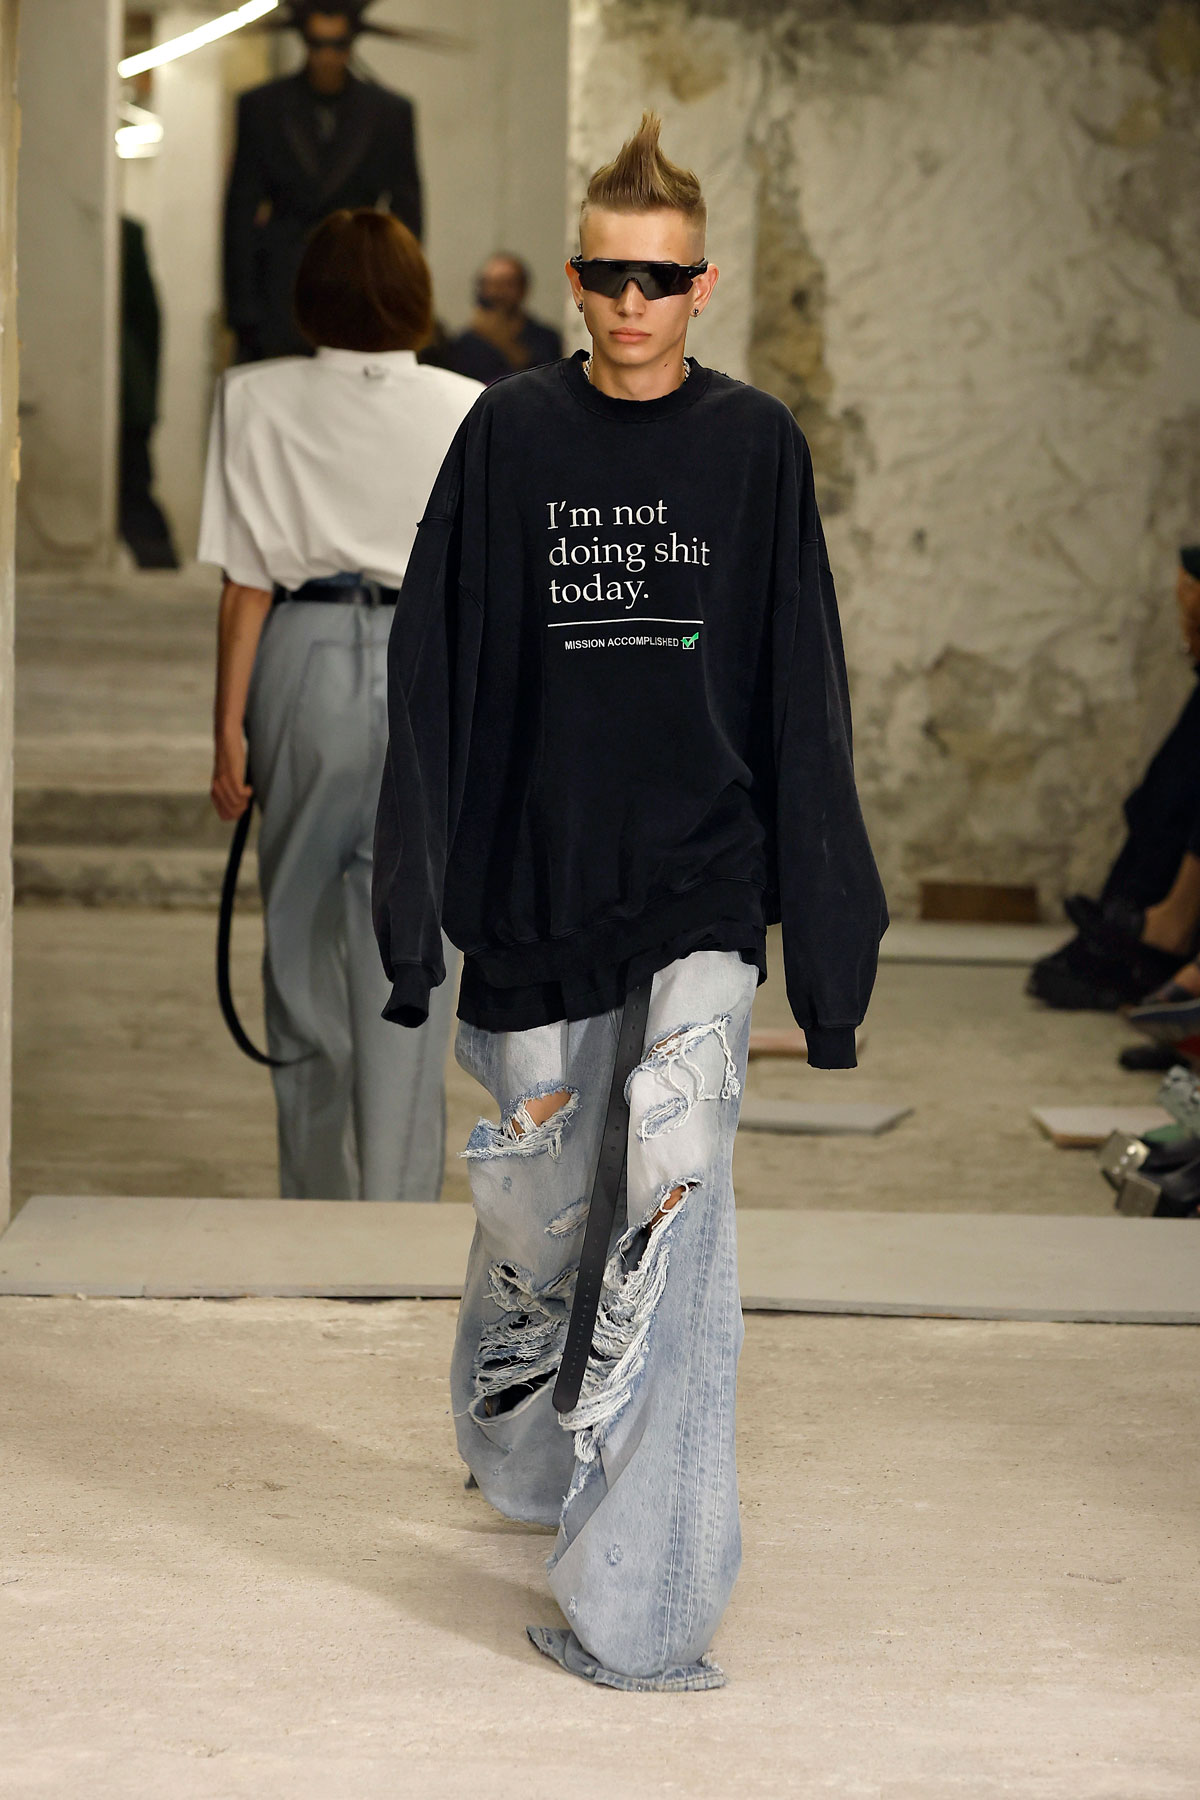 Don't shoot': why Vetements' latest T-shirt is causing controversy, Fashion